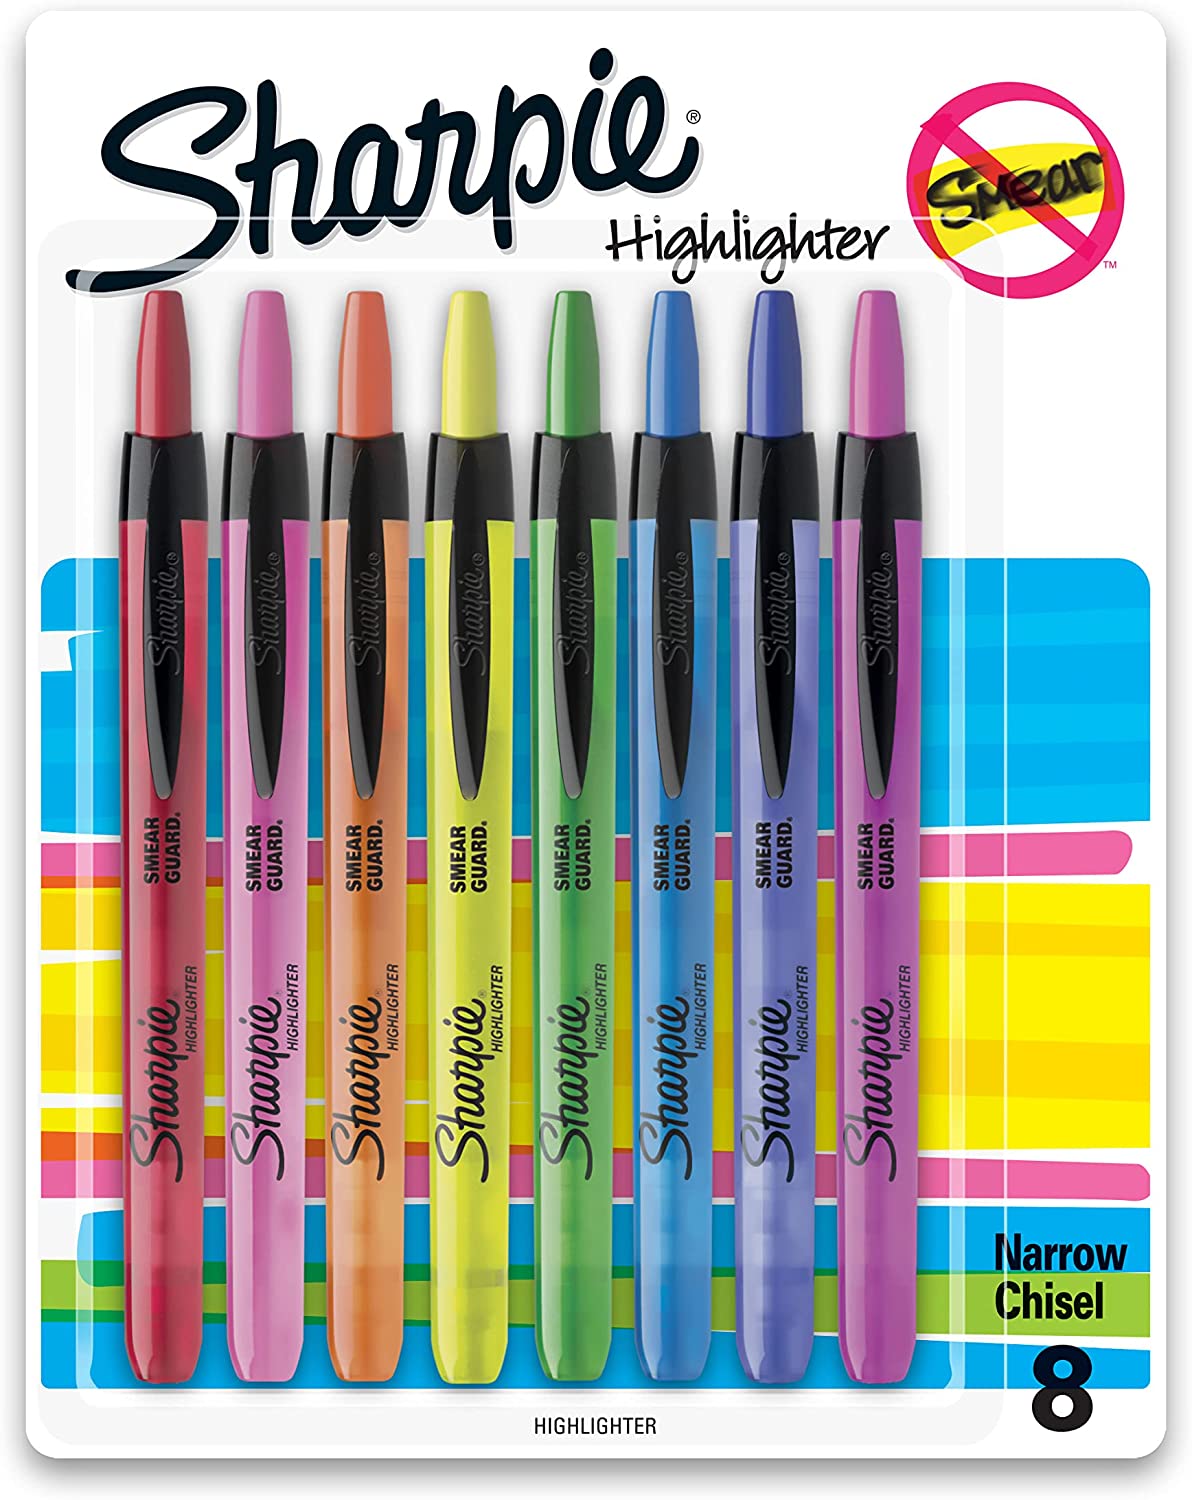 Sonuimy Aesthetic Dual Tips Cute Highlighters, Eye-Care Assorted